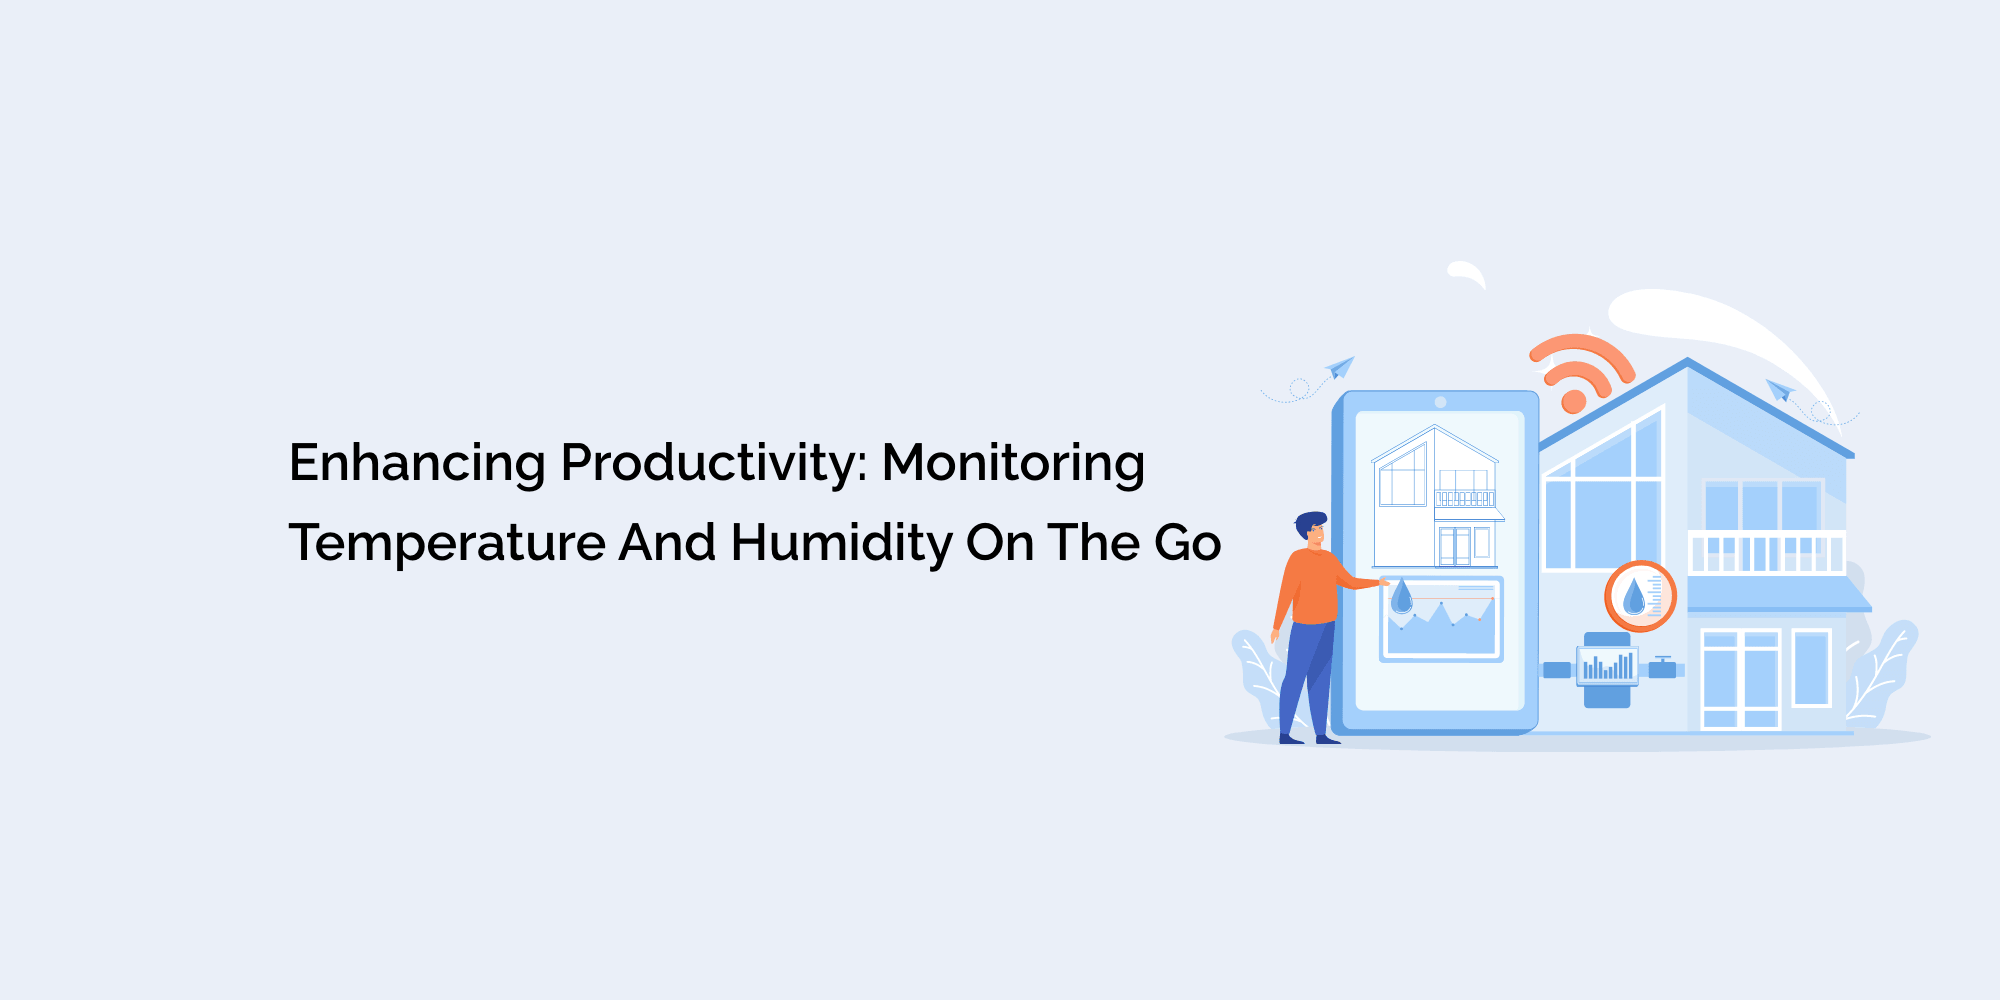 Enhancing Productivity: Monitoring Temperature and Humidity on the Go